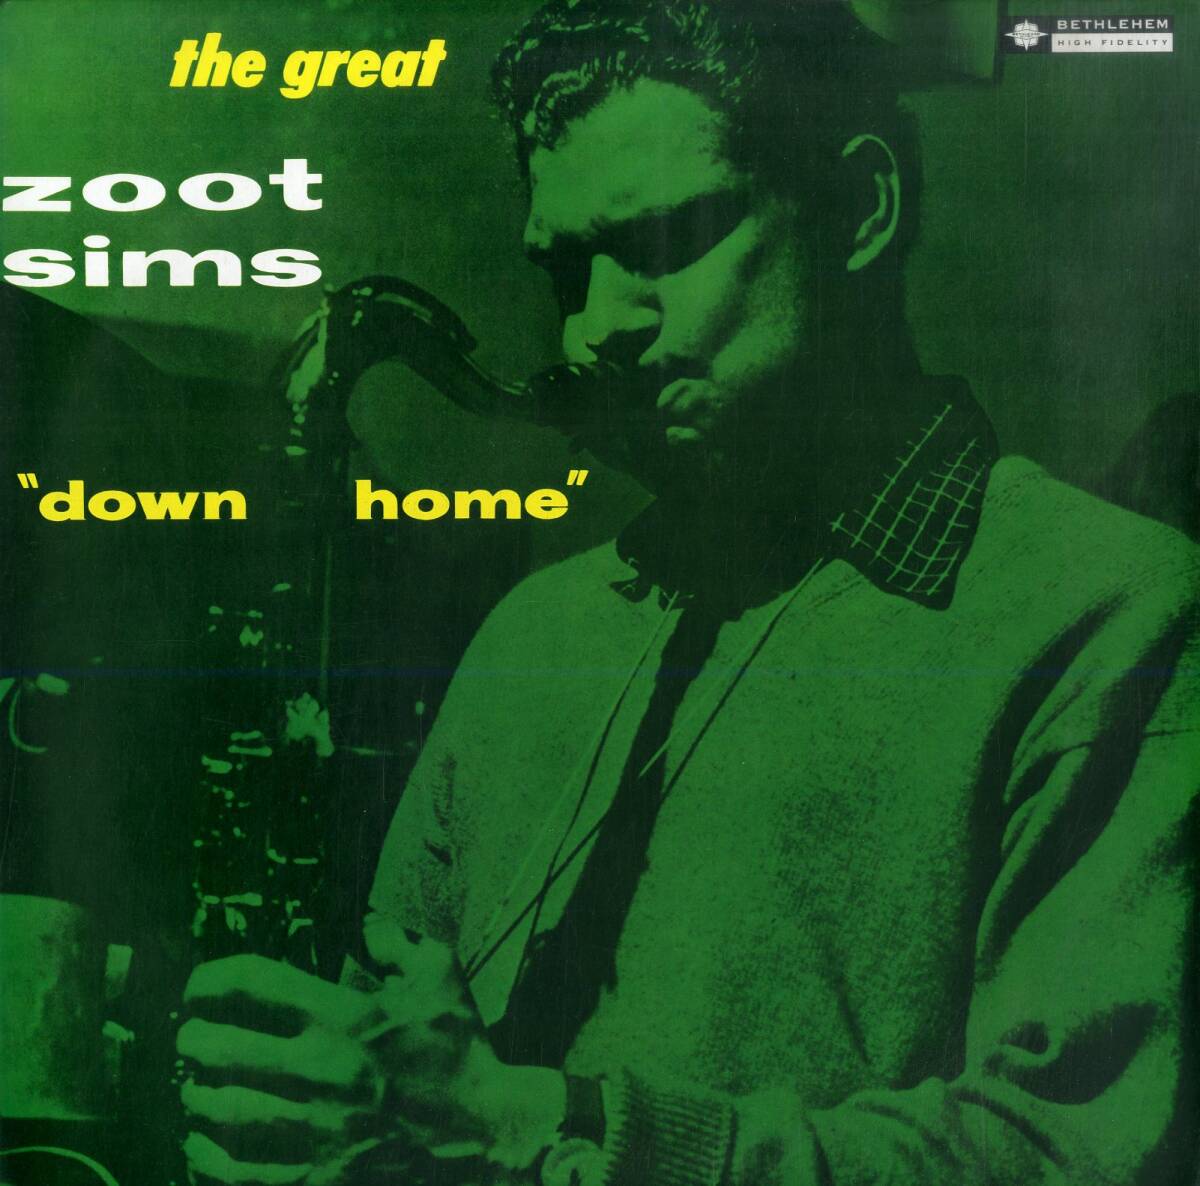 A00592092/LP/ズート・シムズ (ZOOT SIMS)「Down Home (PAP-23014・クールジャズ・スウィングJAZZ)」の画像1